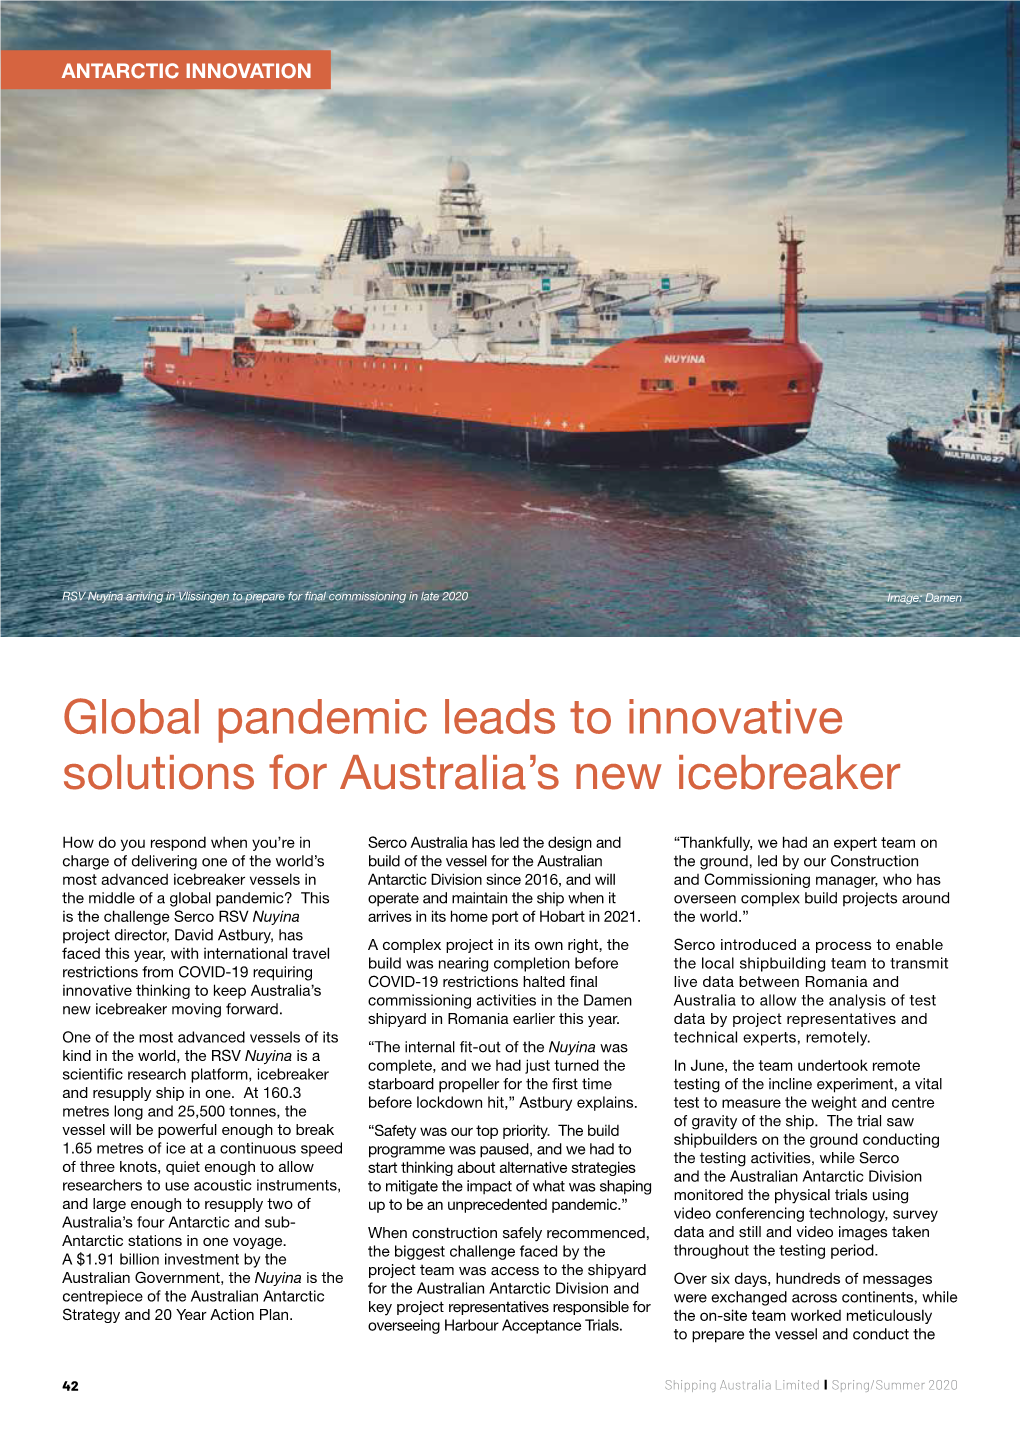 Global Pandemic Leads to Innovative Solutions for Australia's New